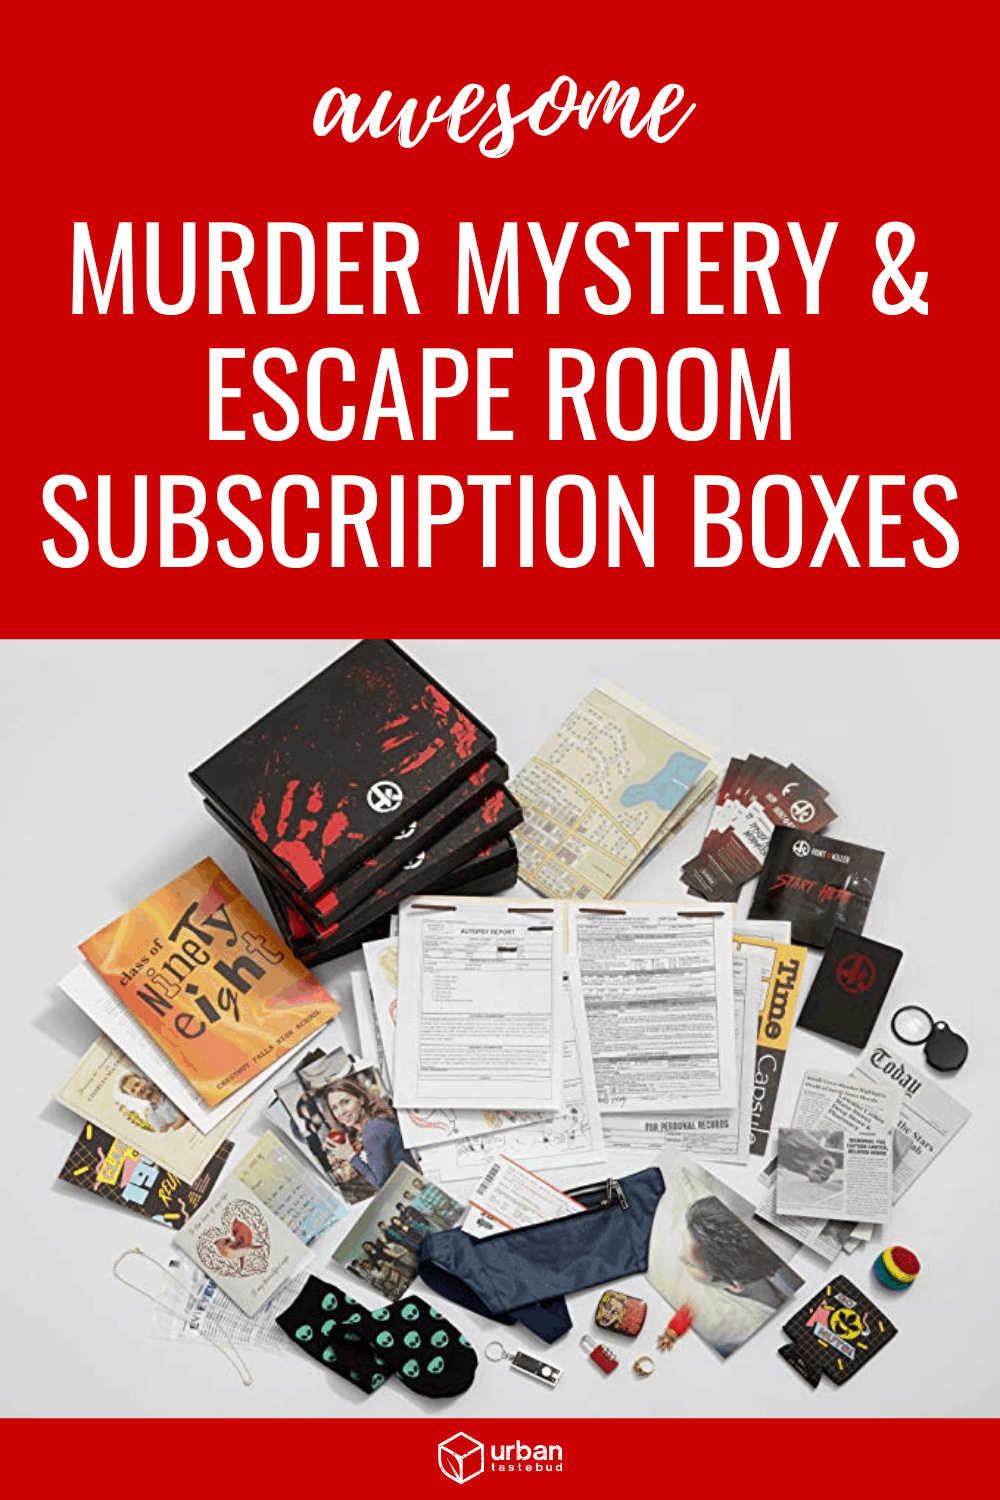 Best Murder Mystery and Escape Room Subscription Boxes